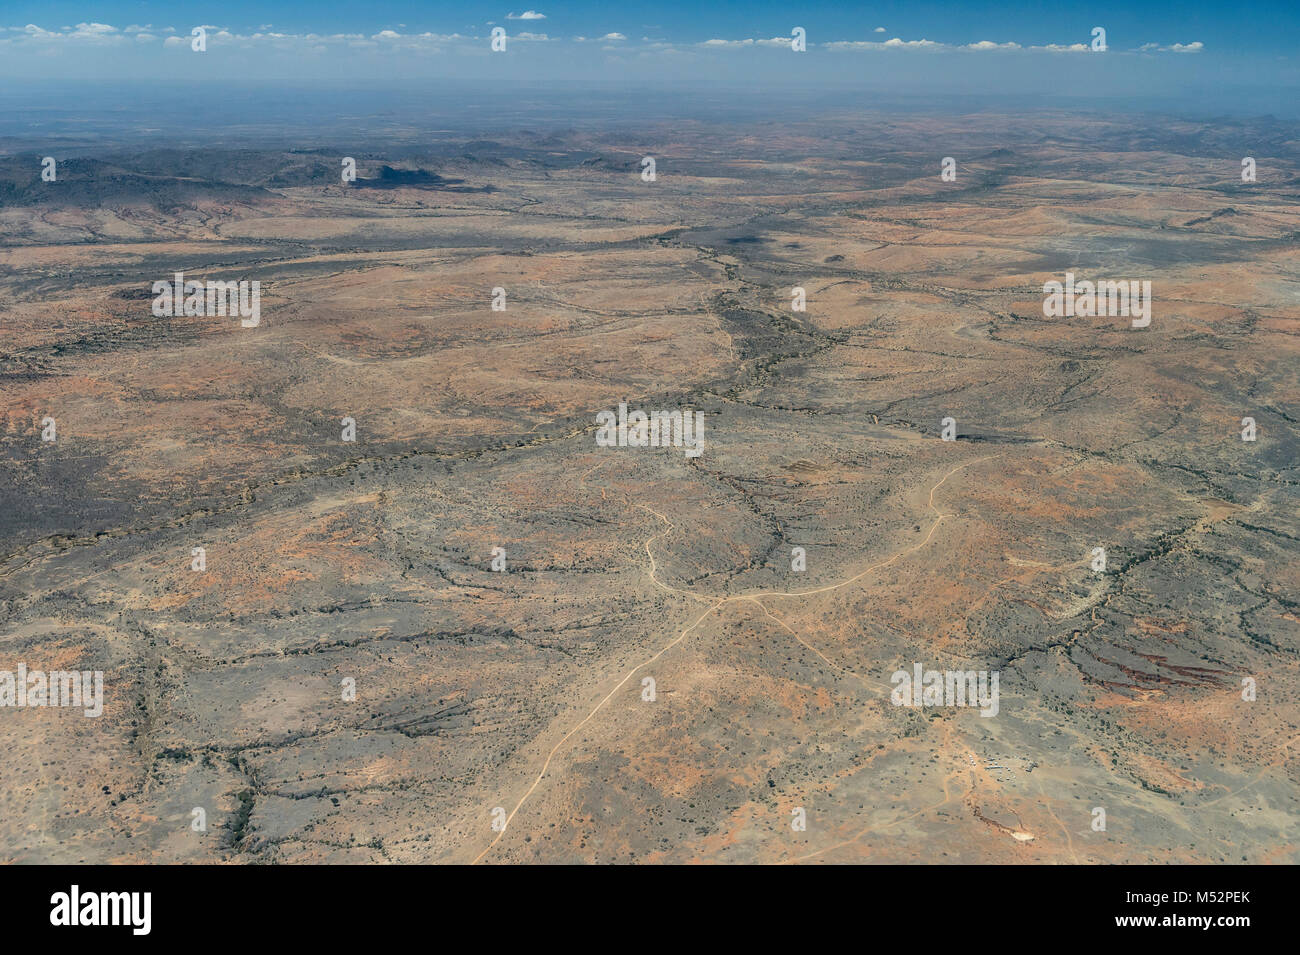 An aerial view of the arid dry country in northern Kenya, north of Laikipia and Mt Kenya. Stock Photo